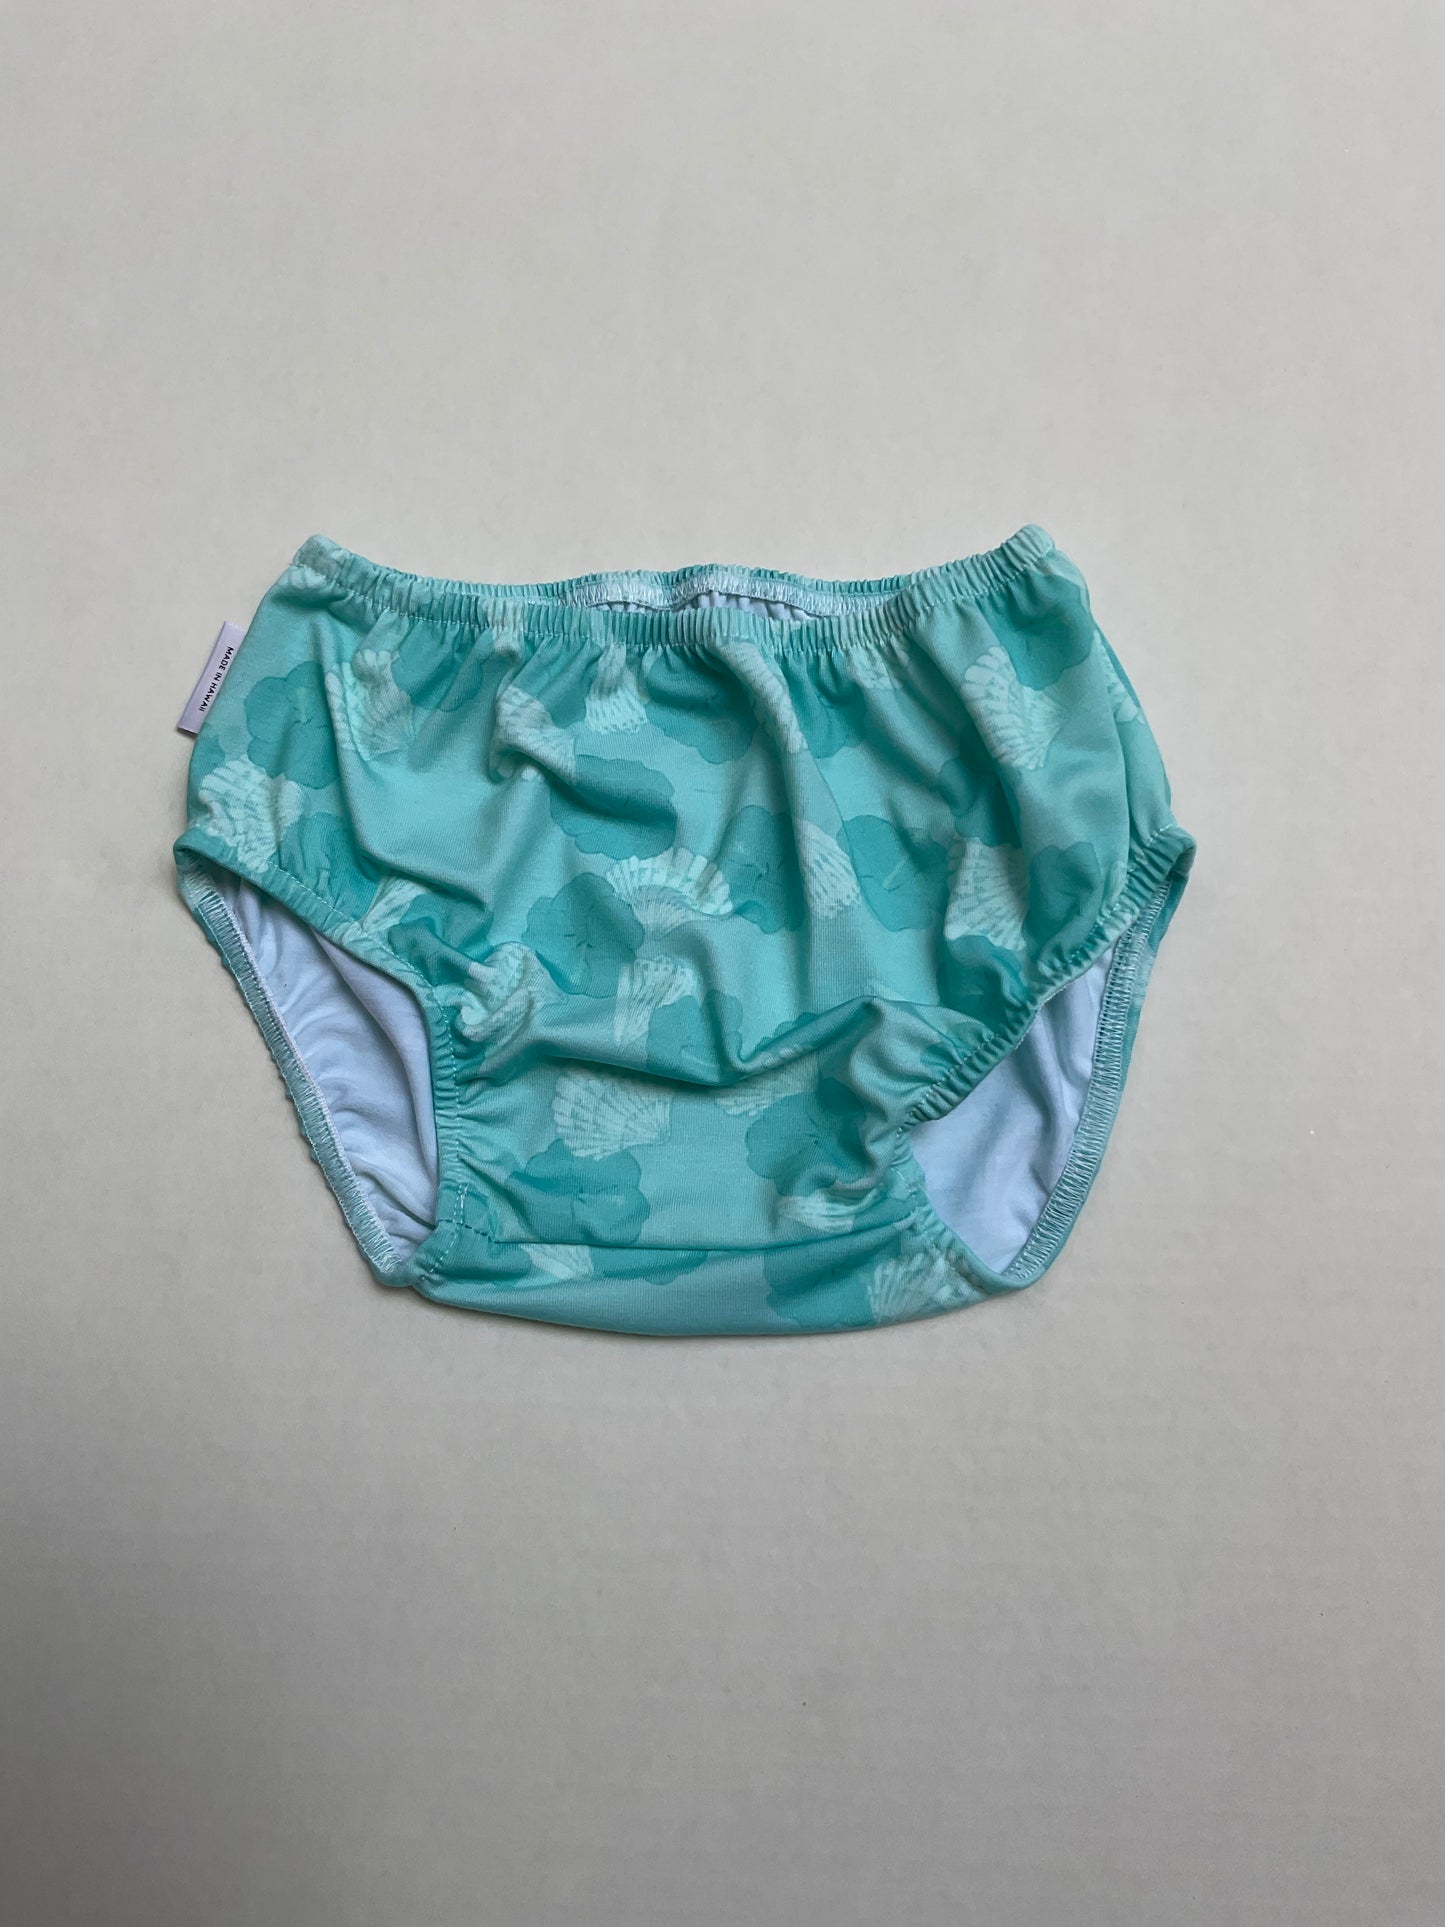 Baby Diaper Covers/Bloomers - loveatdawn